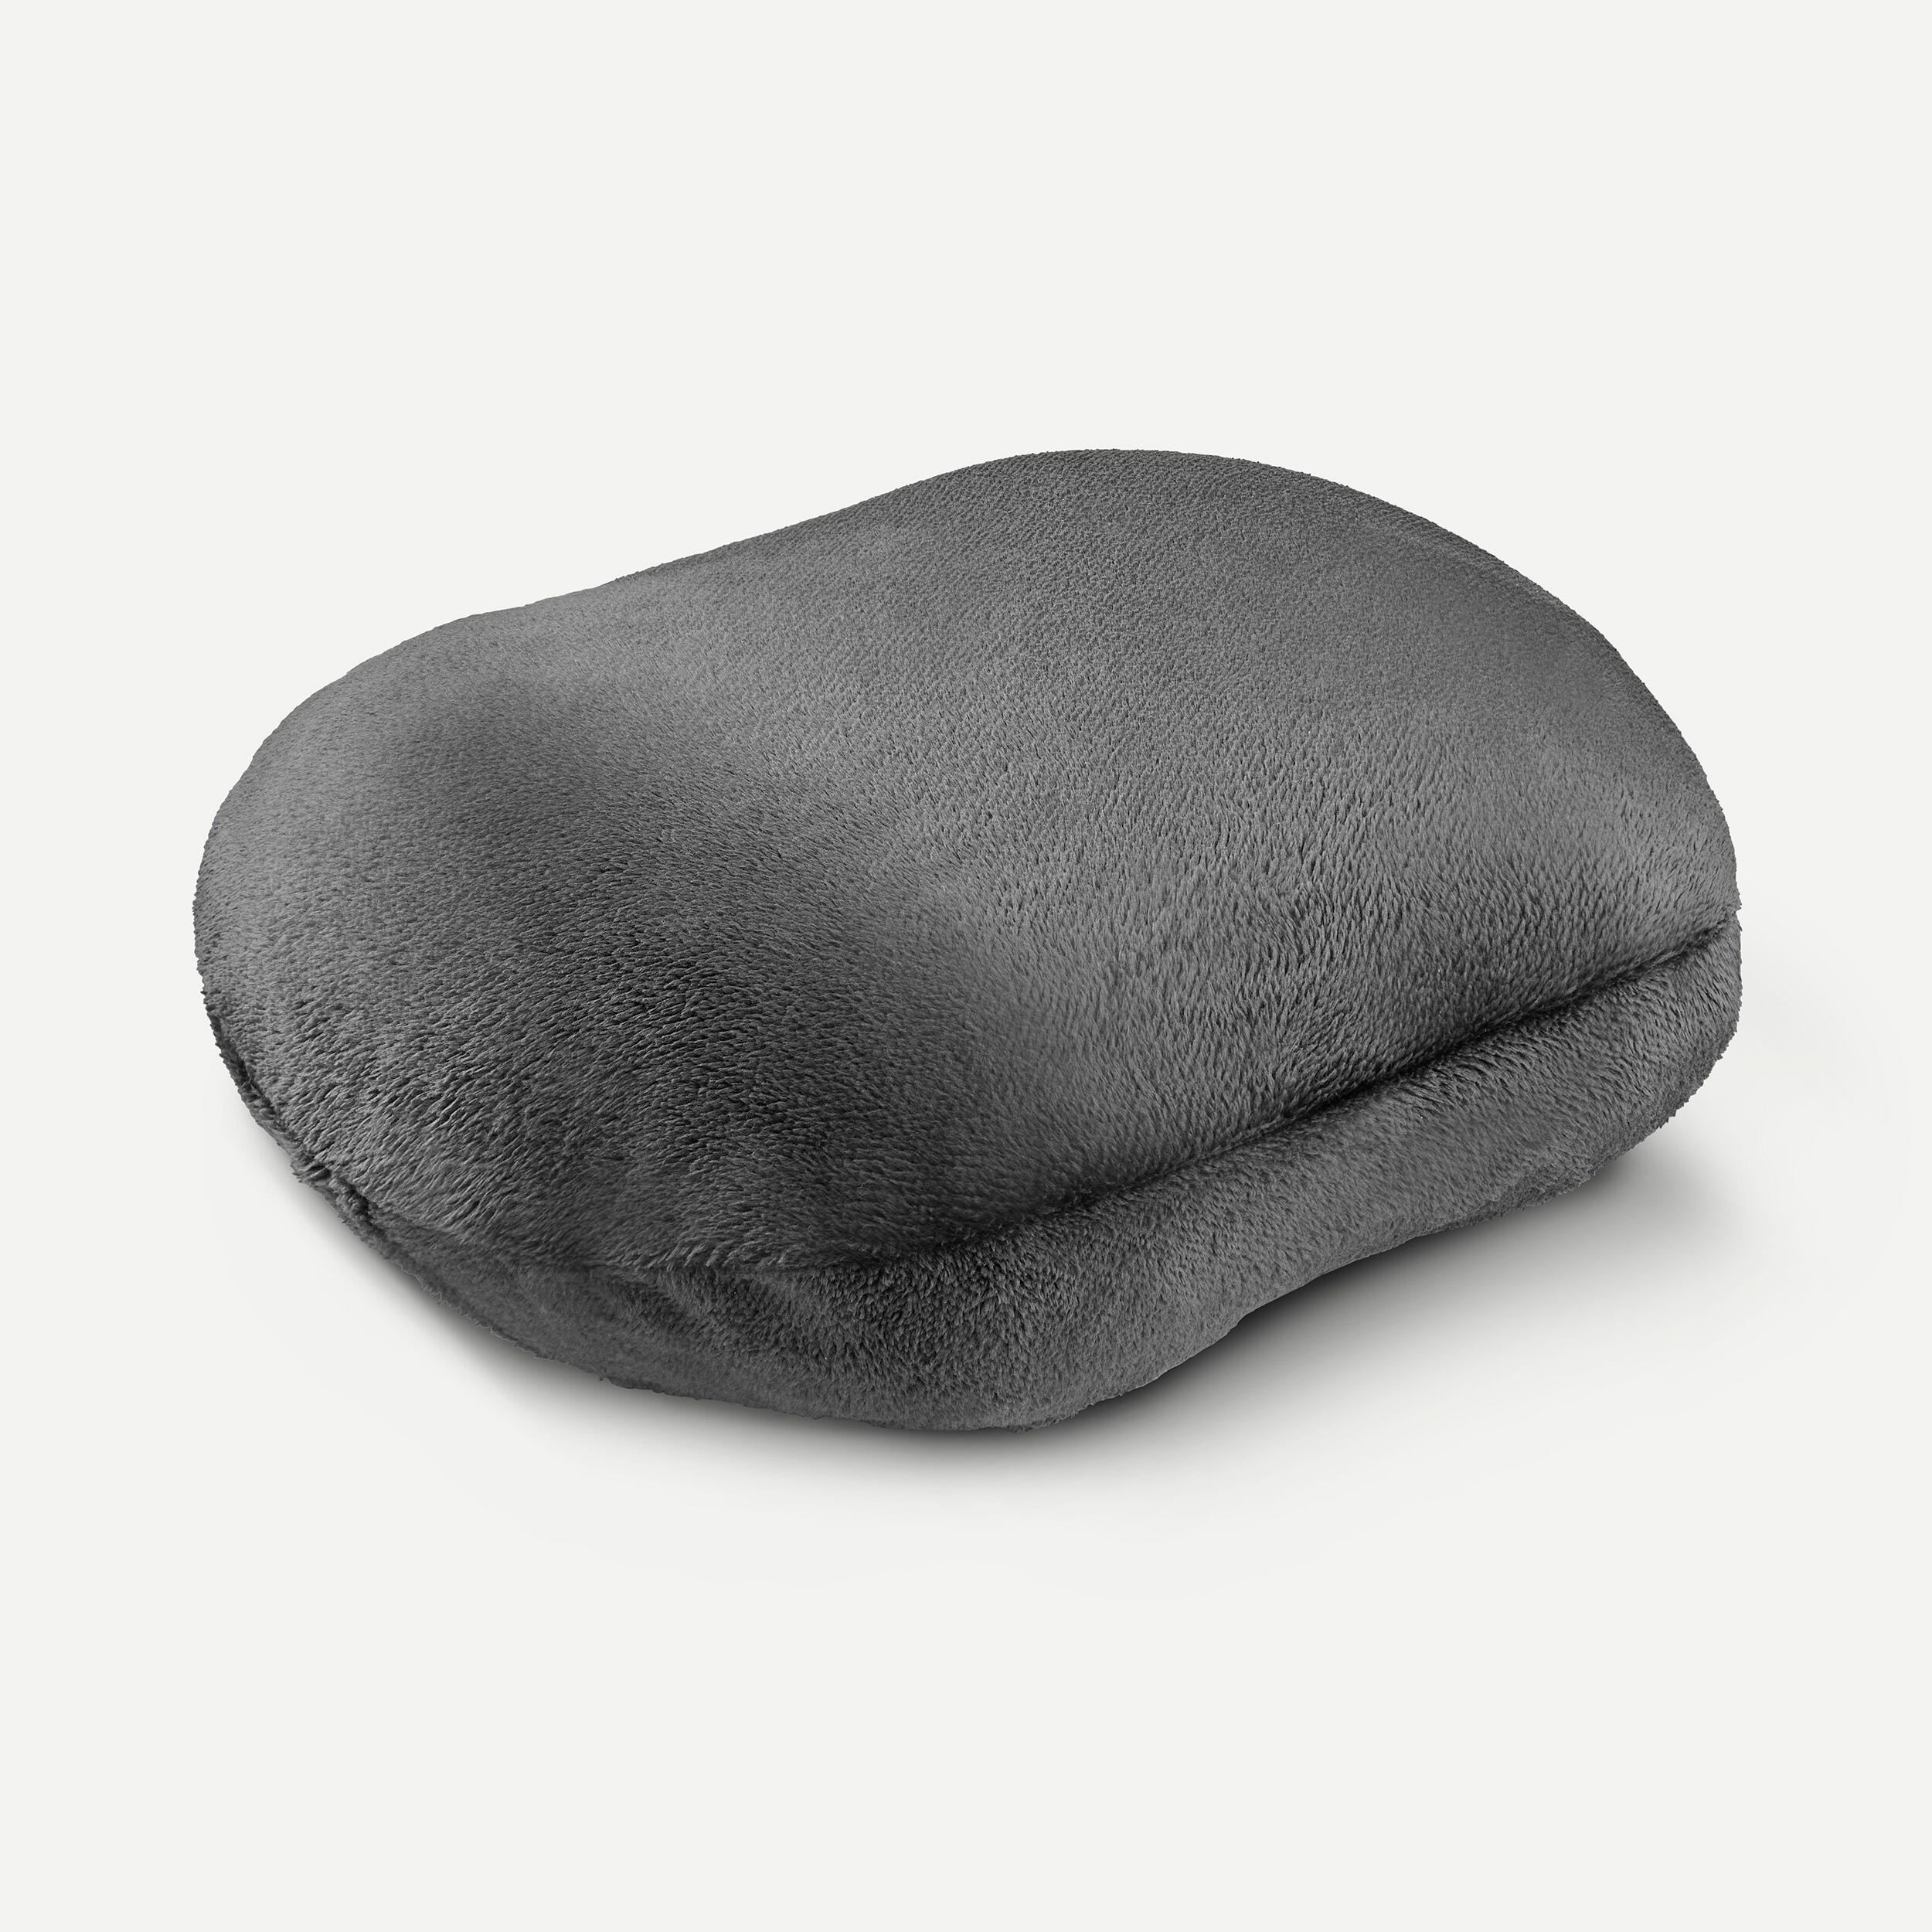 2 In 1 travel pillow-Travel 500 1/4